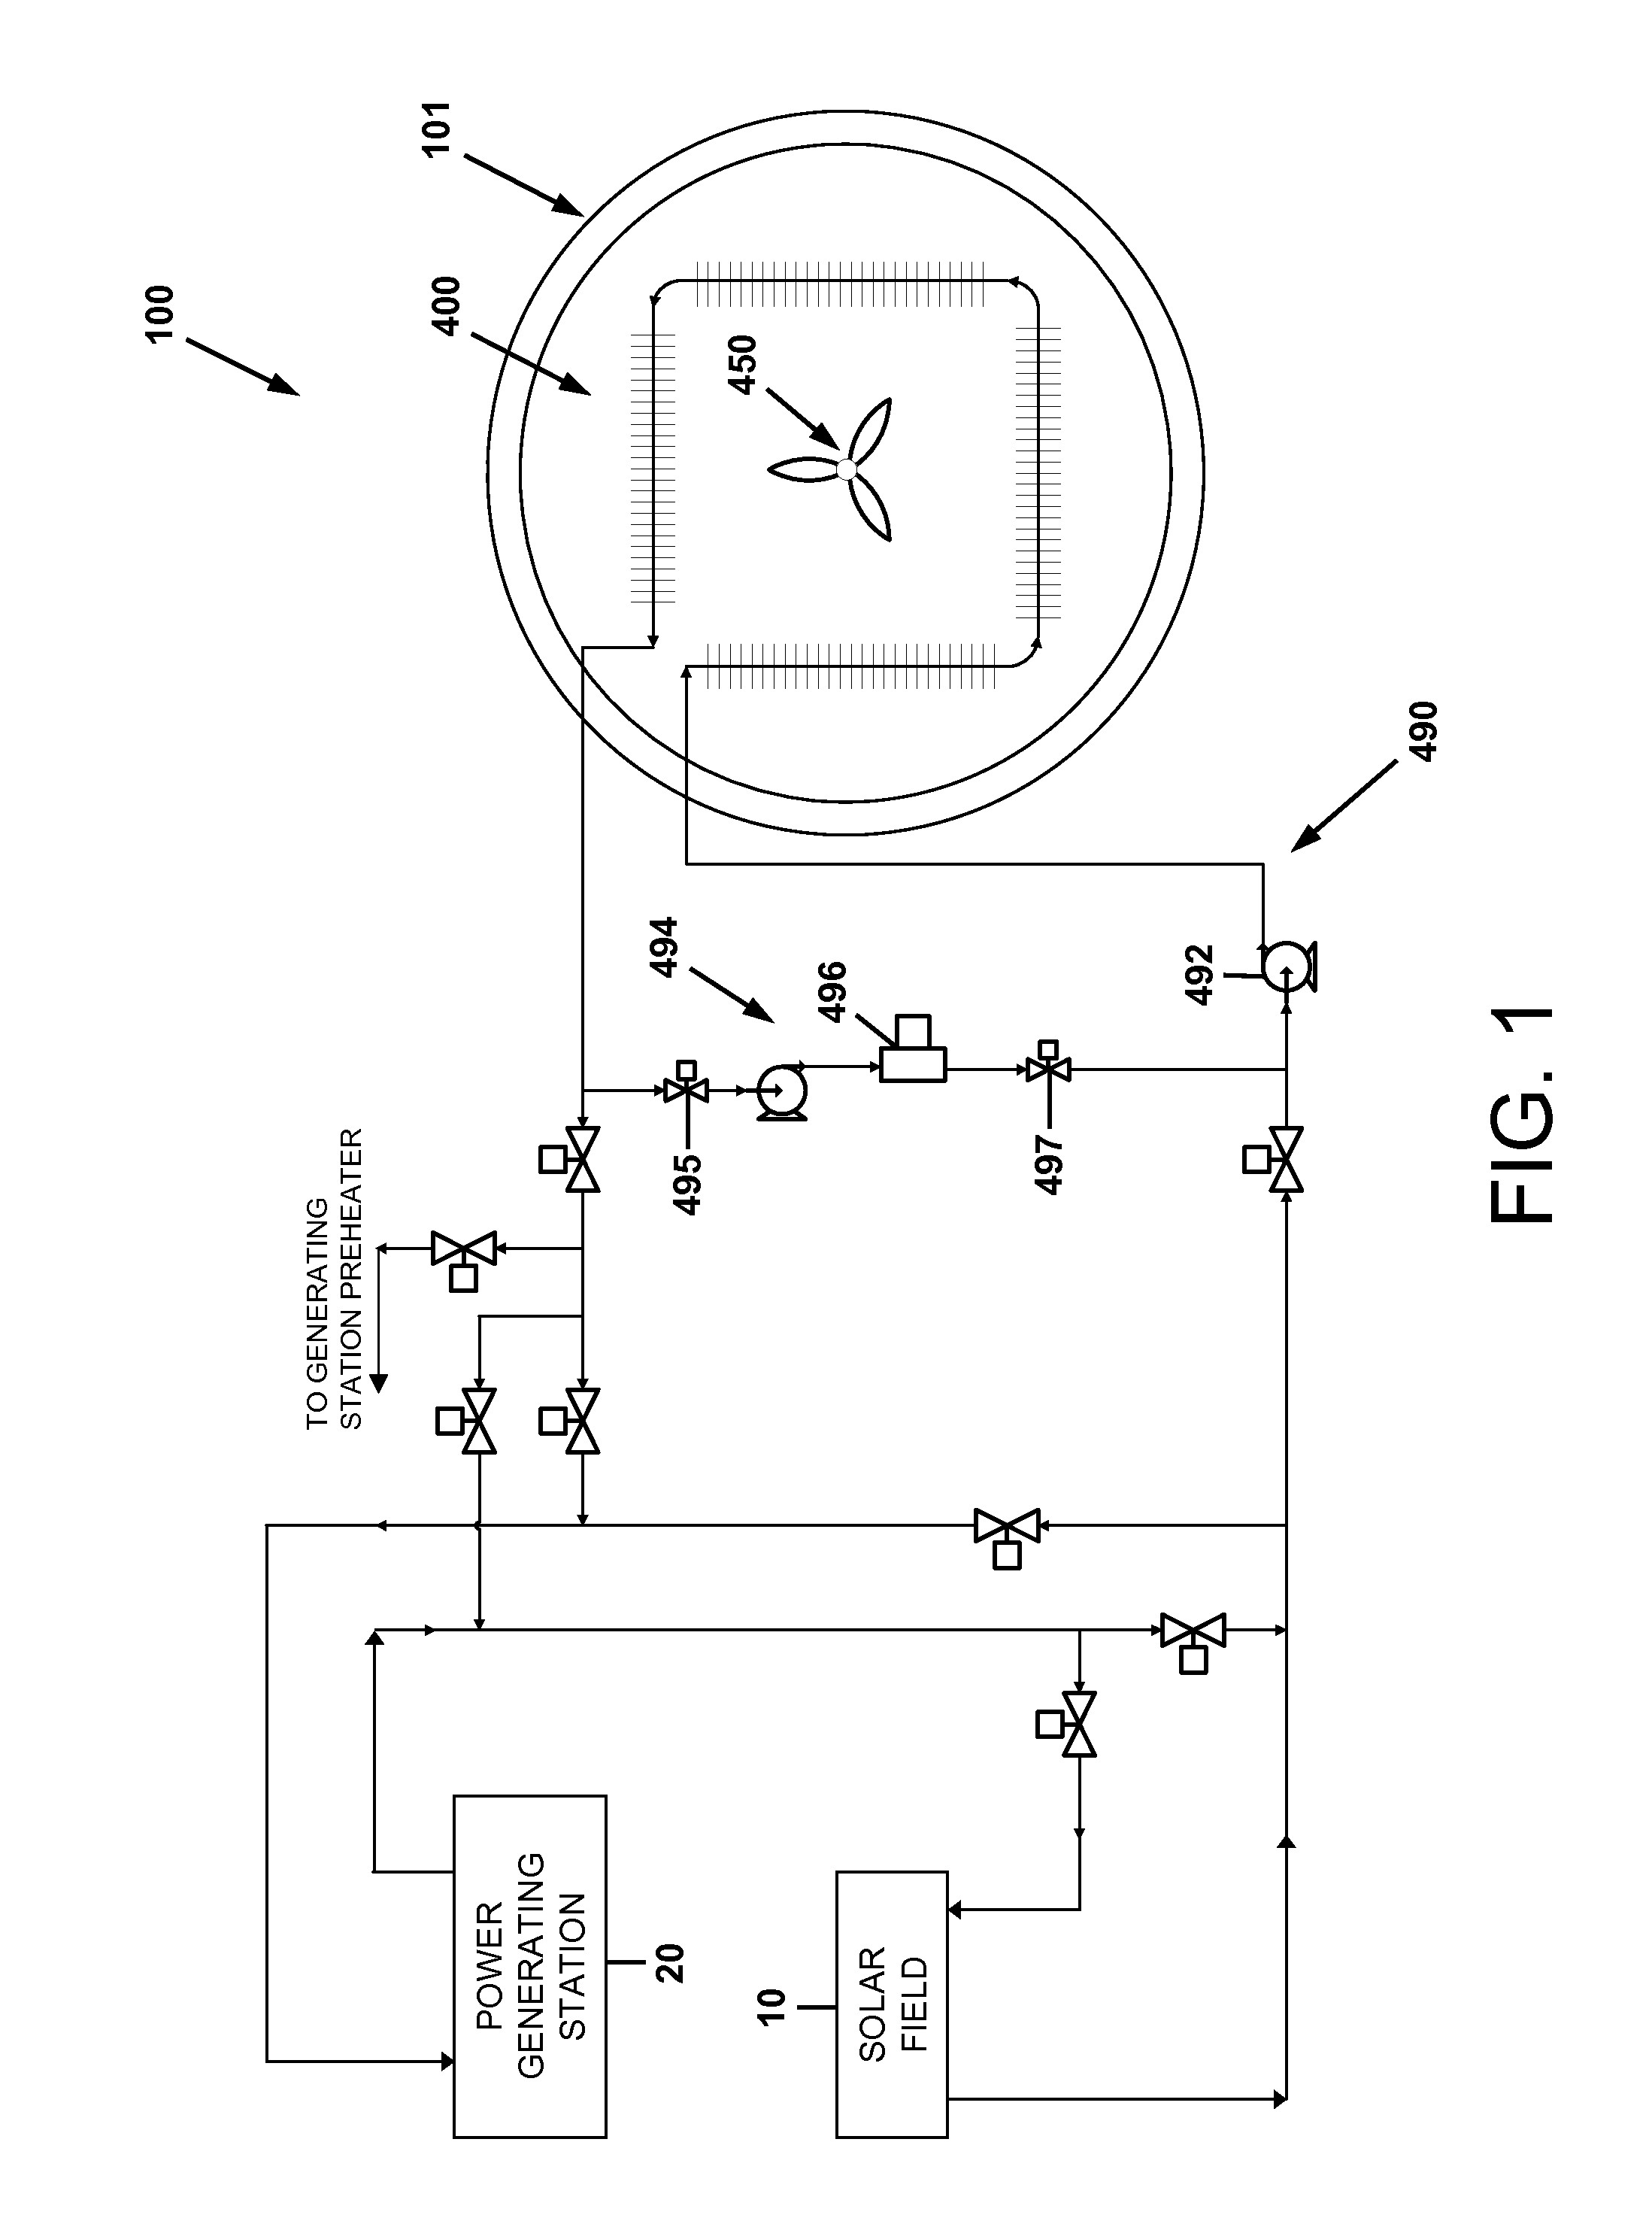 Energy storage vessel, systems, and methods